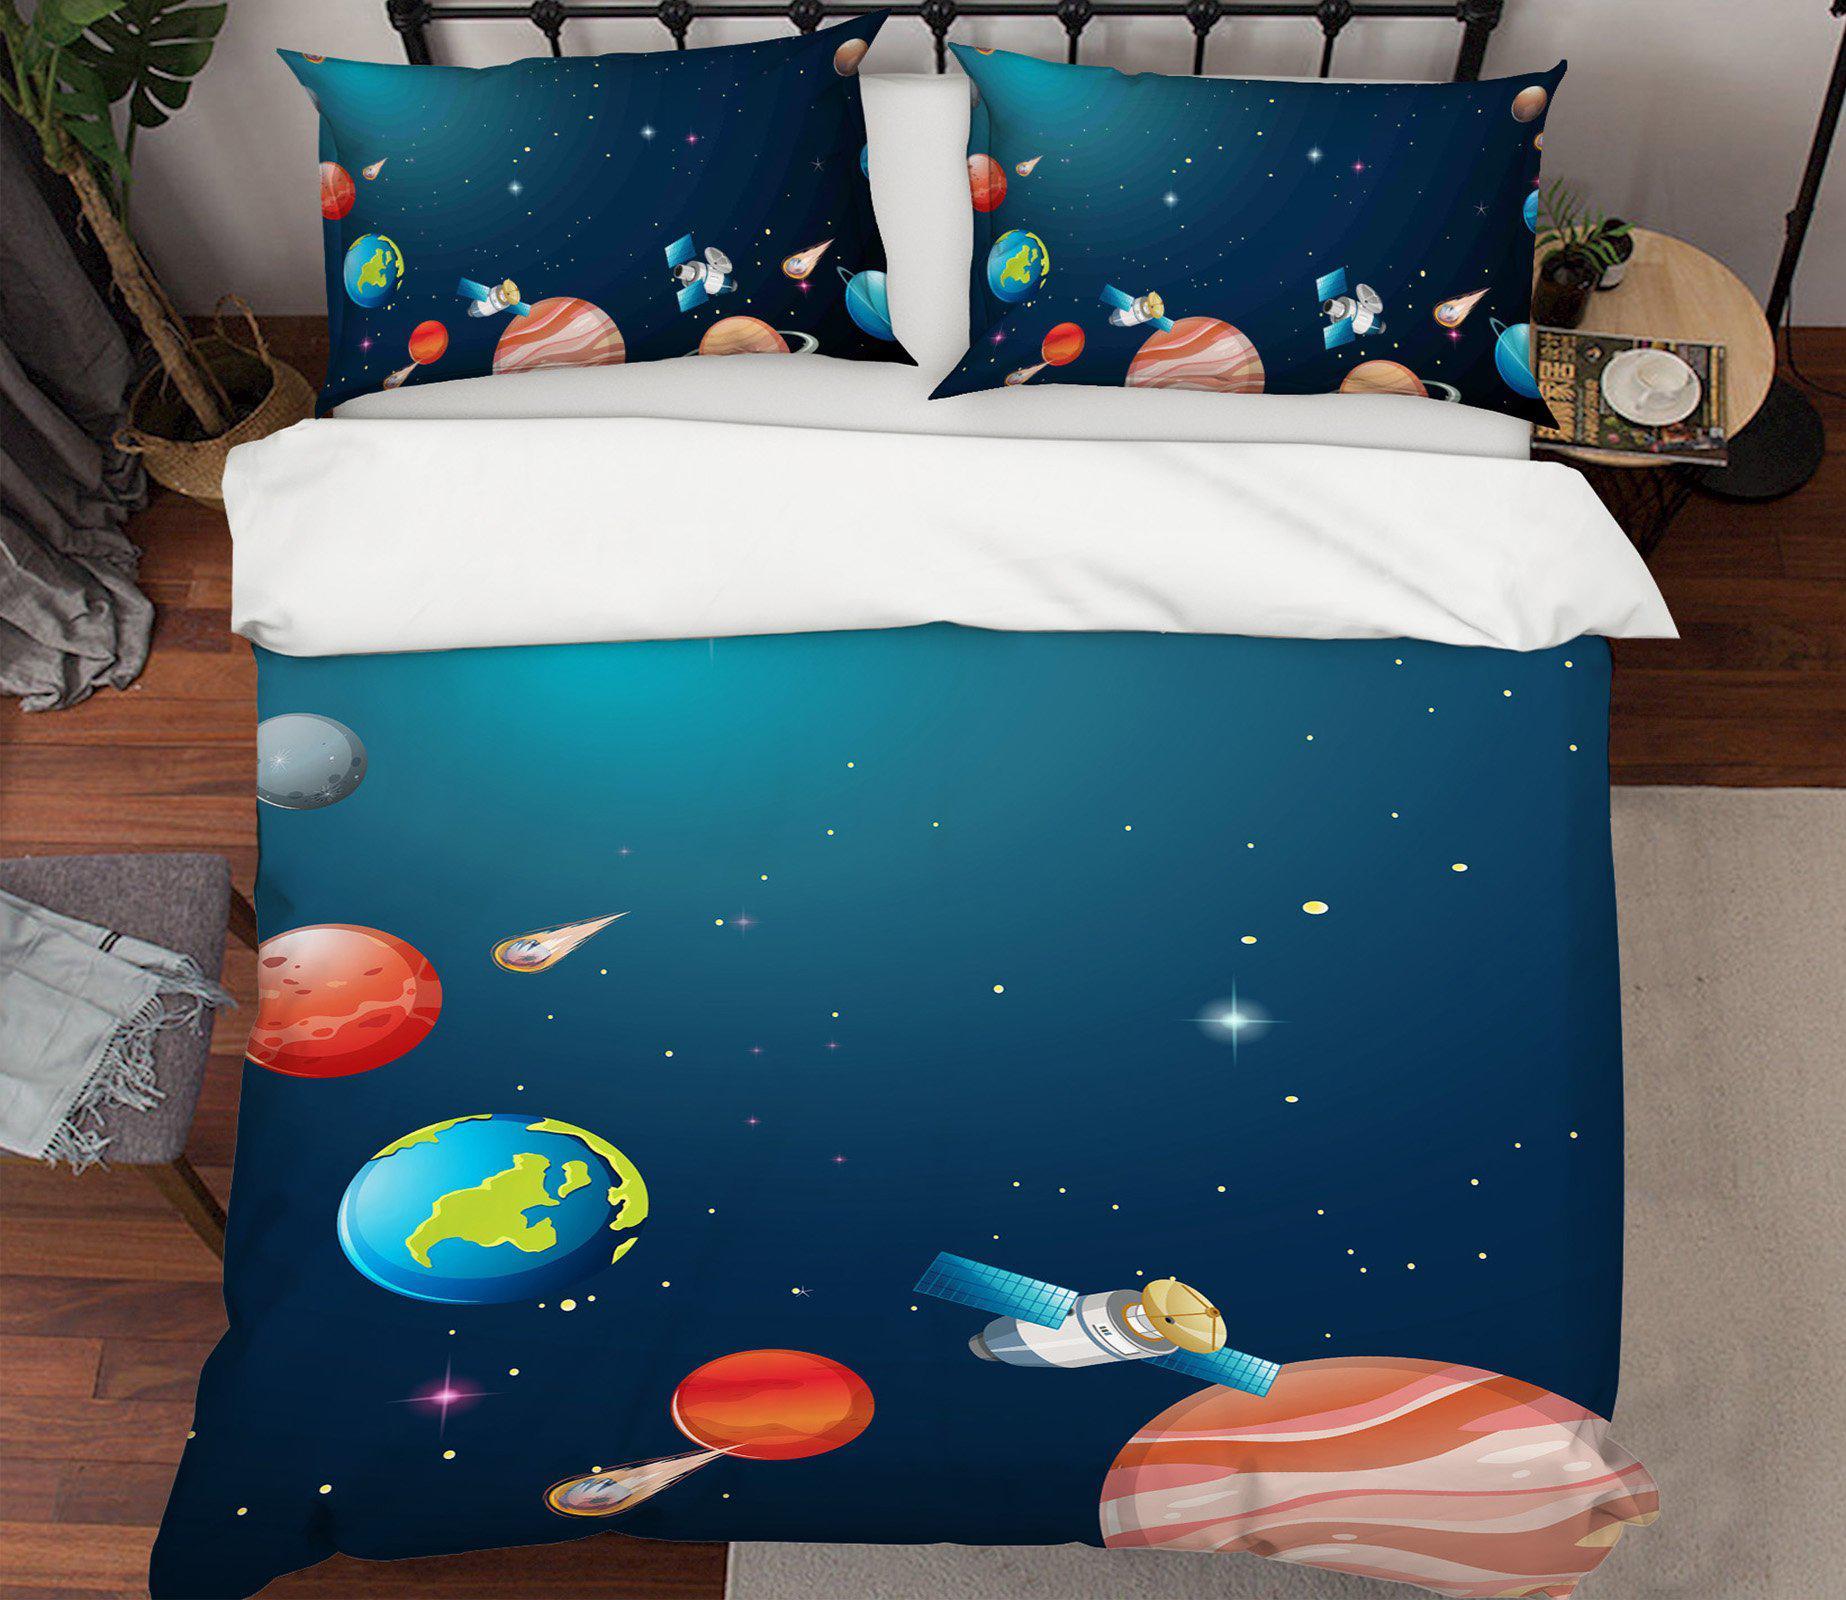 3D Bed Pillowcases Quilt Planet 19167 Quilt Cover Set Bedding Set Pillowcases 3D Bed Pillowcases Quilt Duvet cover